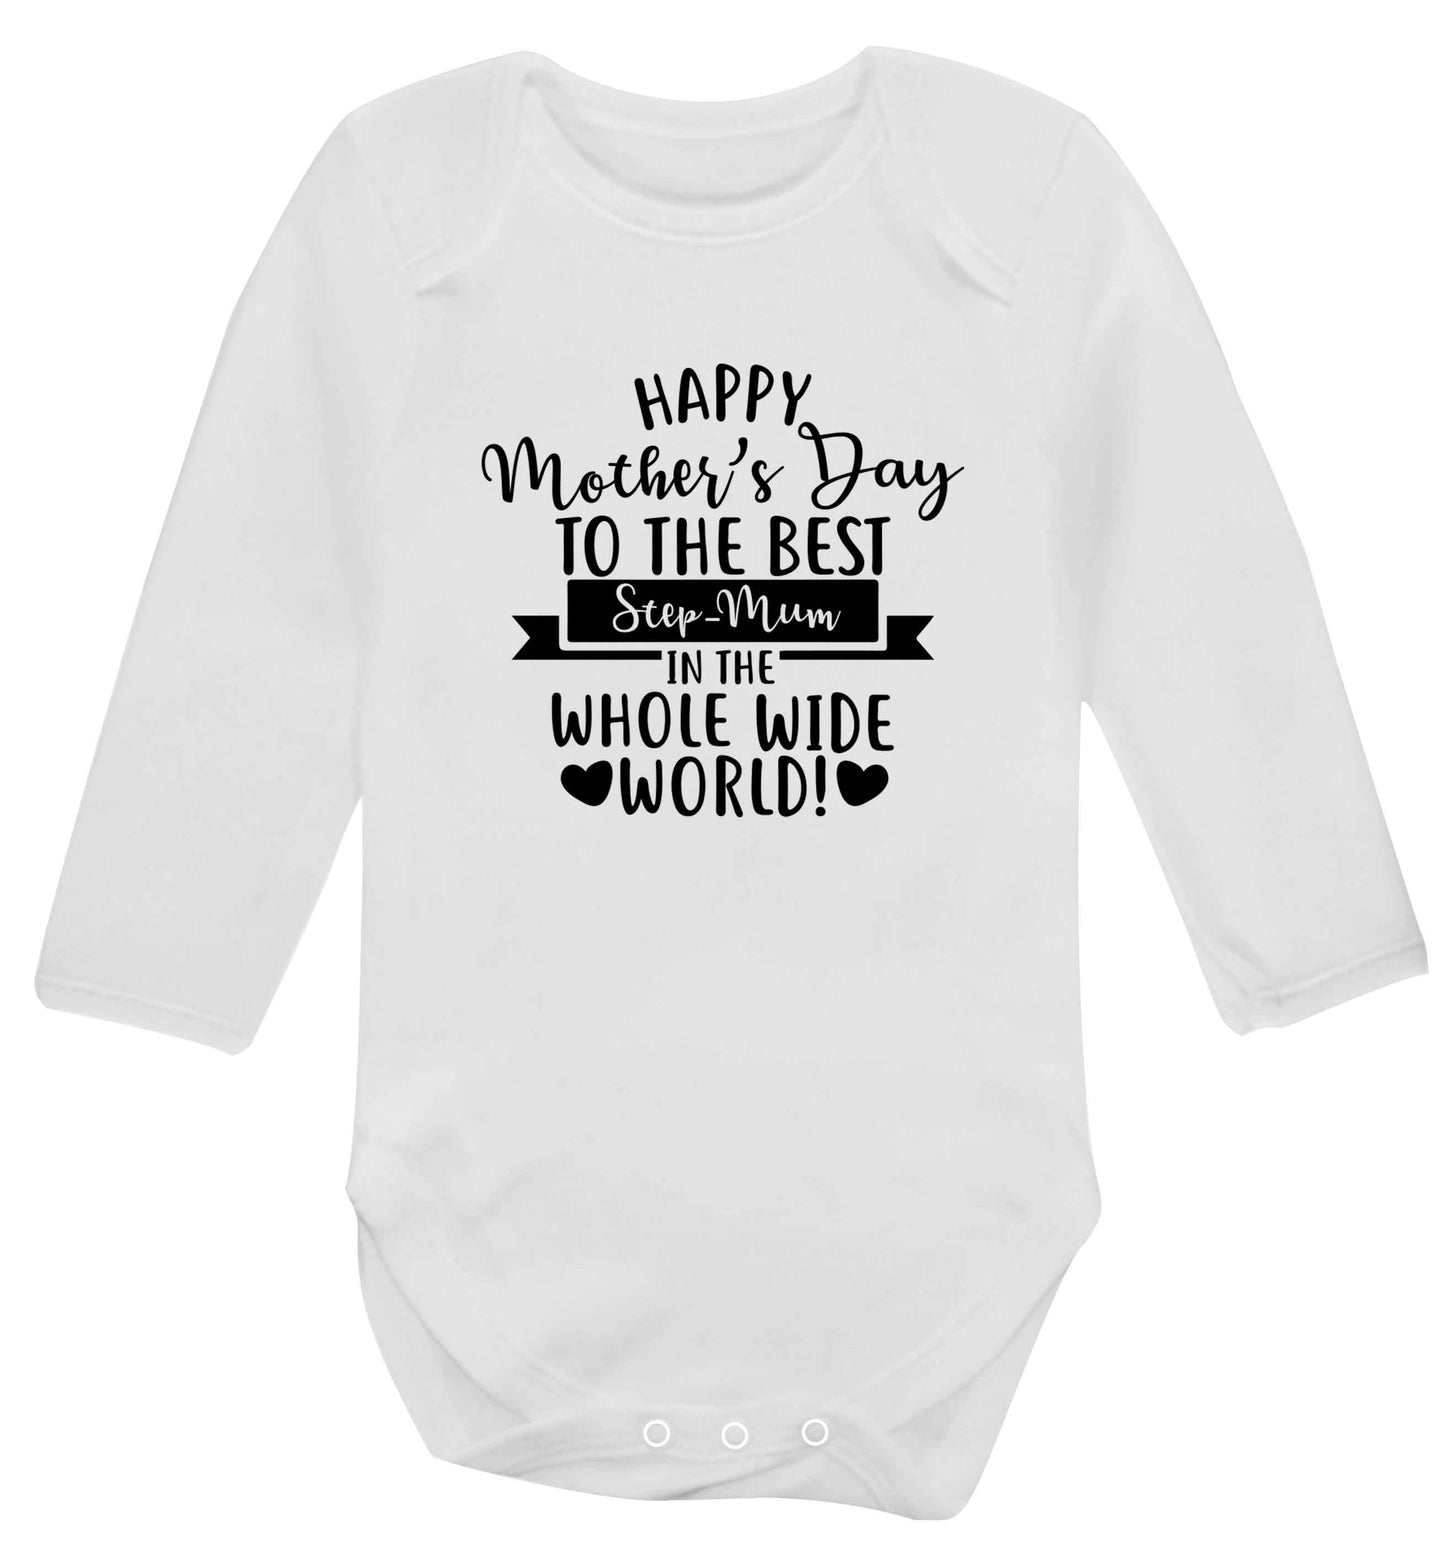 Happy mother's day to the best step-mum in the world baby vest long sleeved white 6-12 months